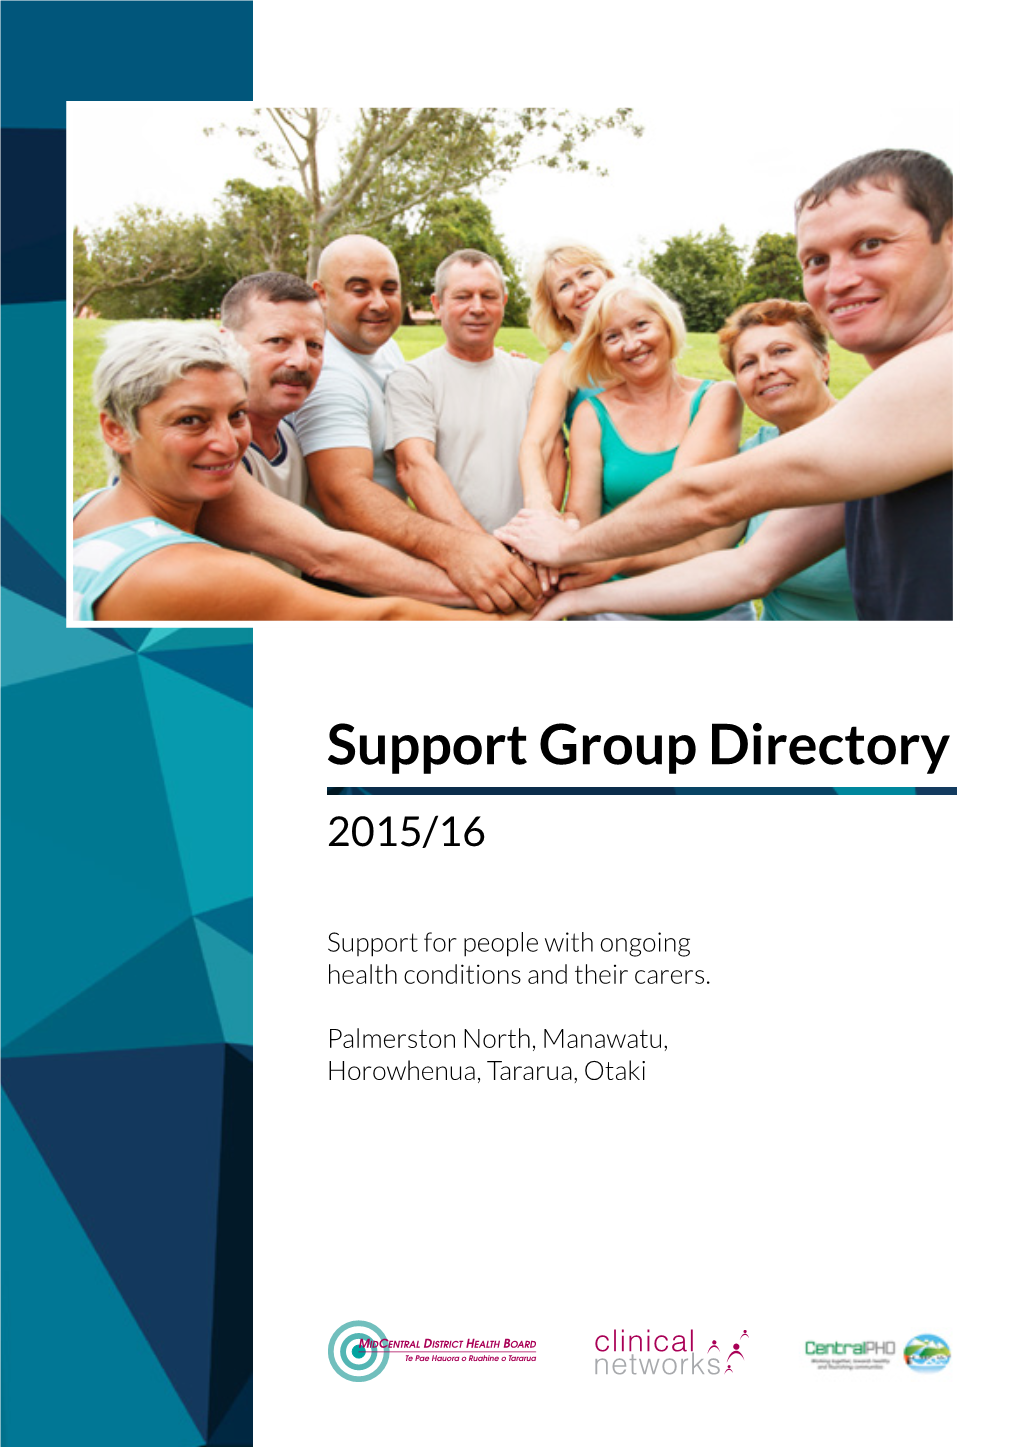 Support Group Directory 2015/16